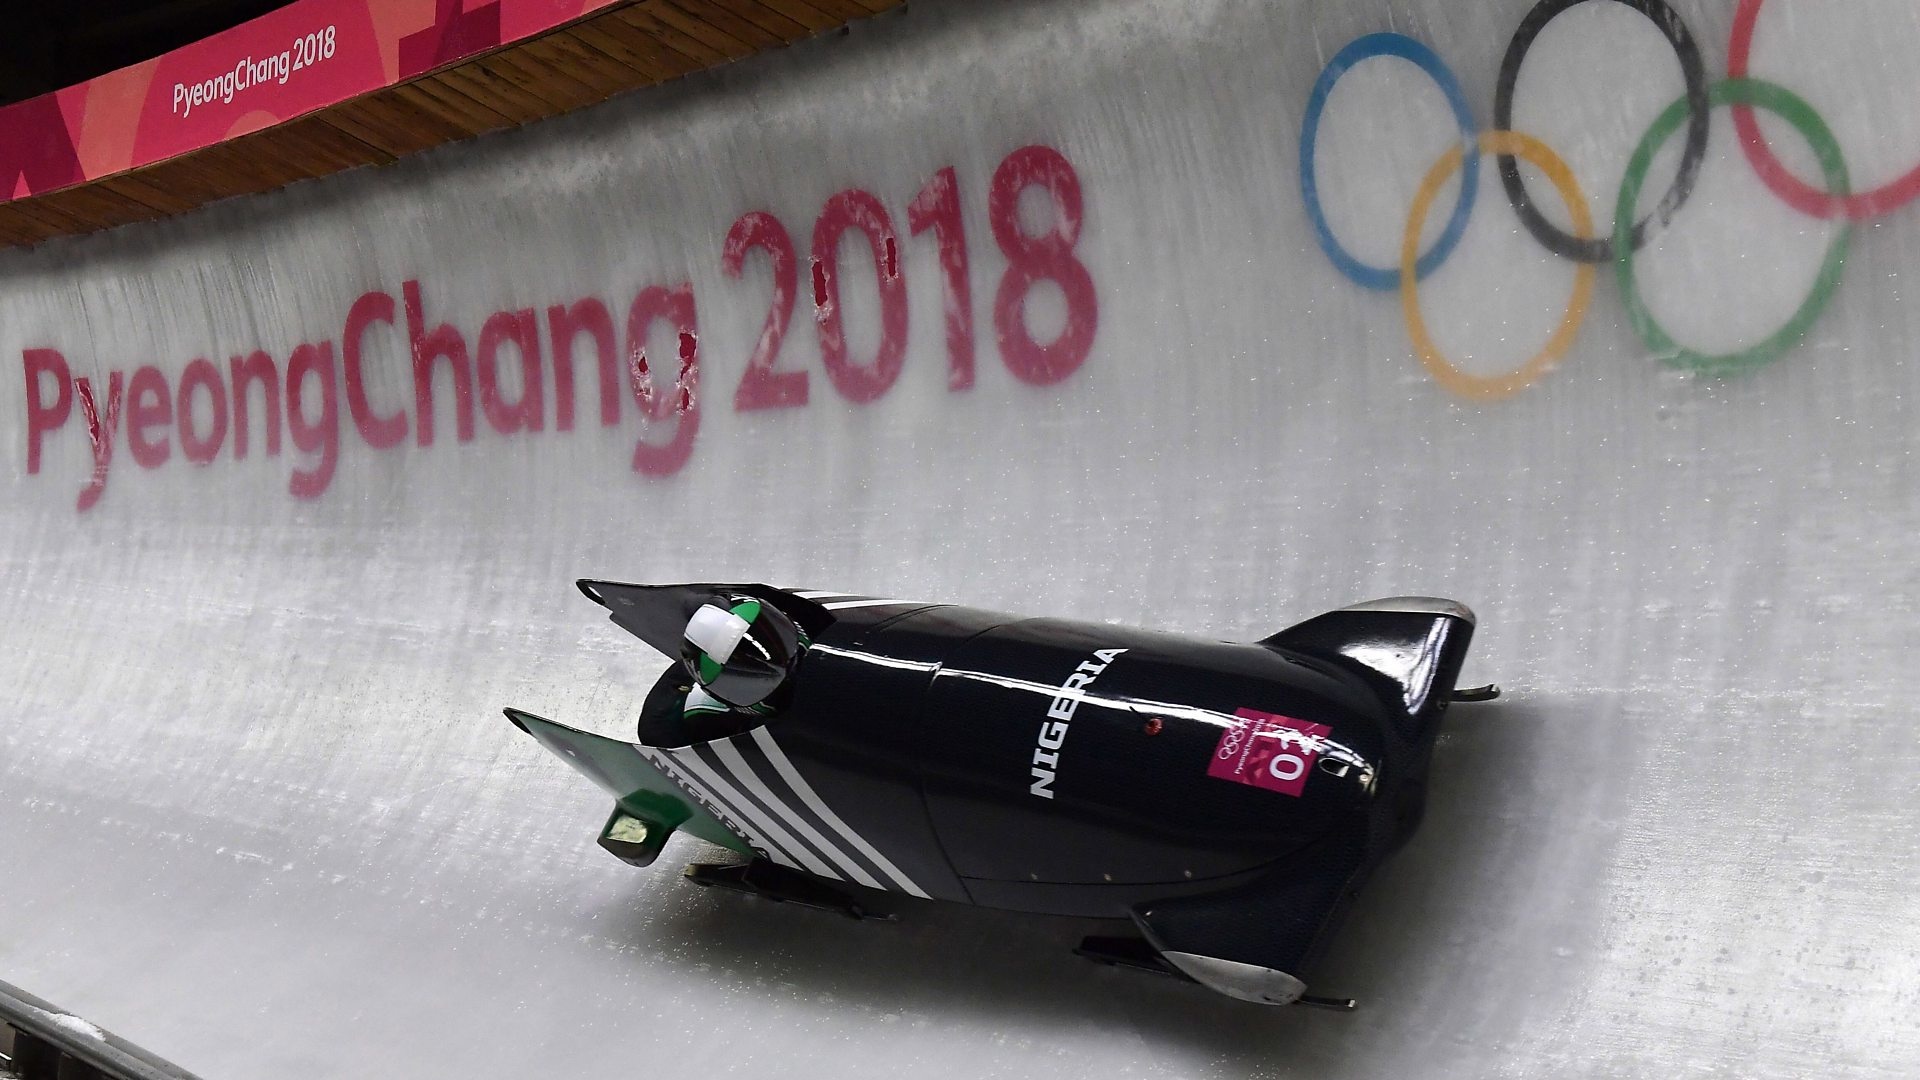 Bobsleigh: Nigeria's bobsled team, The 2018 PyeongChang Winter Olympic Games. 1920x1080 Full HD Background.